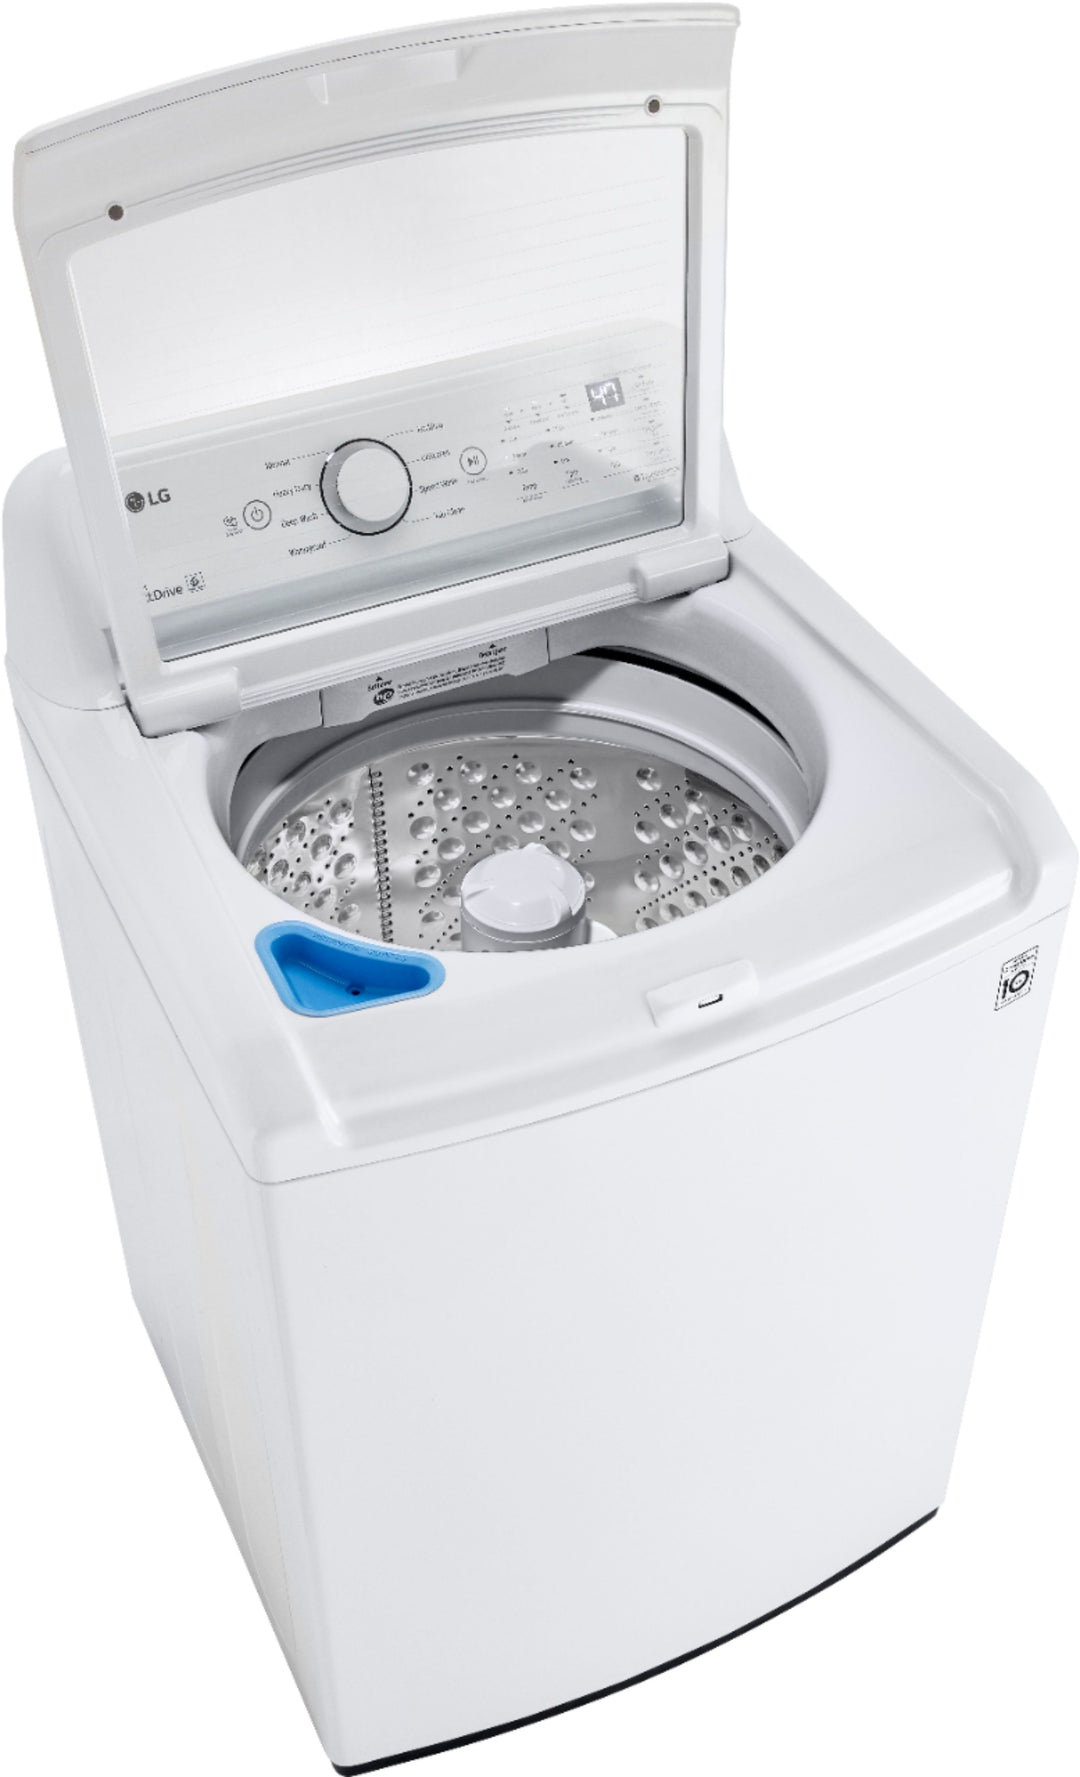 LG - 4.3 Cu. Ft. High-Efficiency Smart Top Load Washer with TurboDrum Technology - White_16